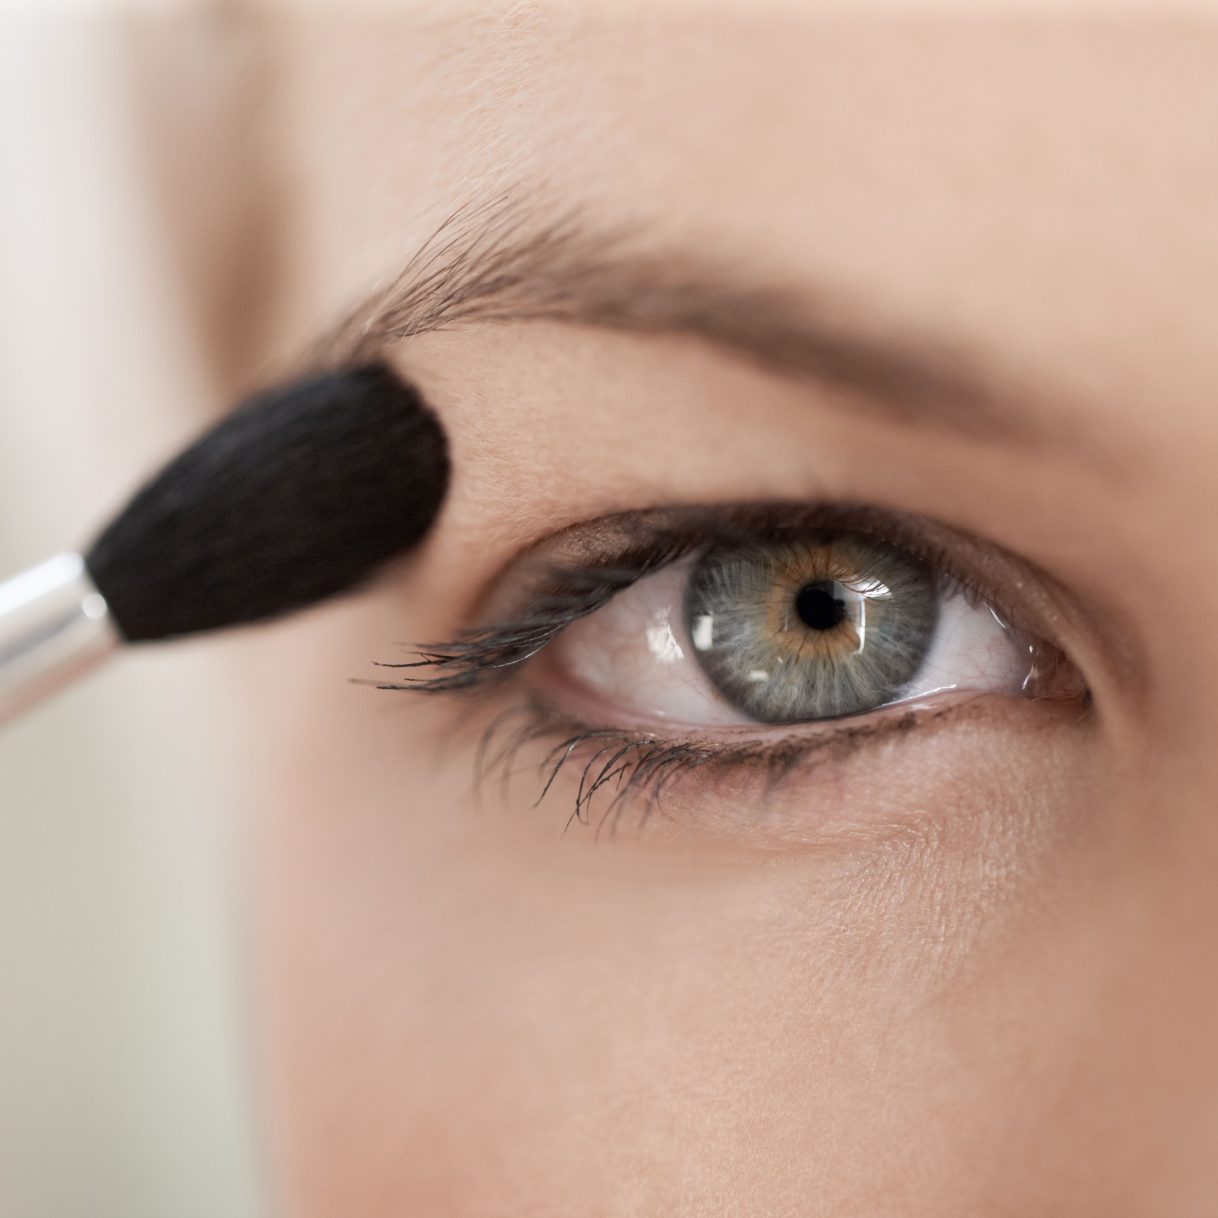 Eye With Makeup Makeup Tricks For Hooded Eyes Hooded Eyes Makeup Tips And Tricks